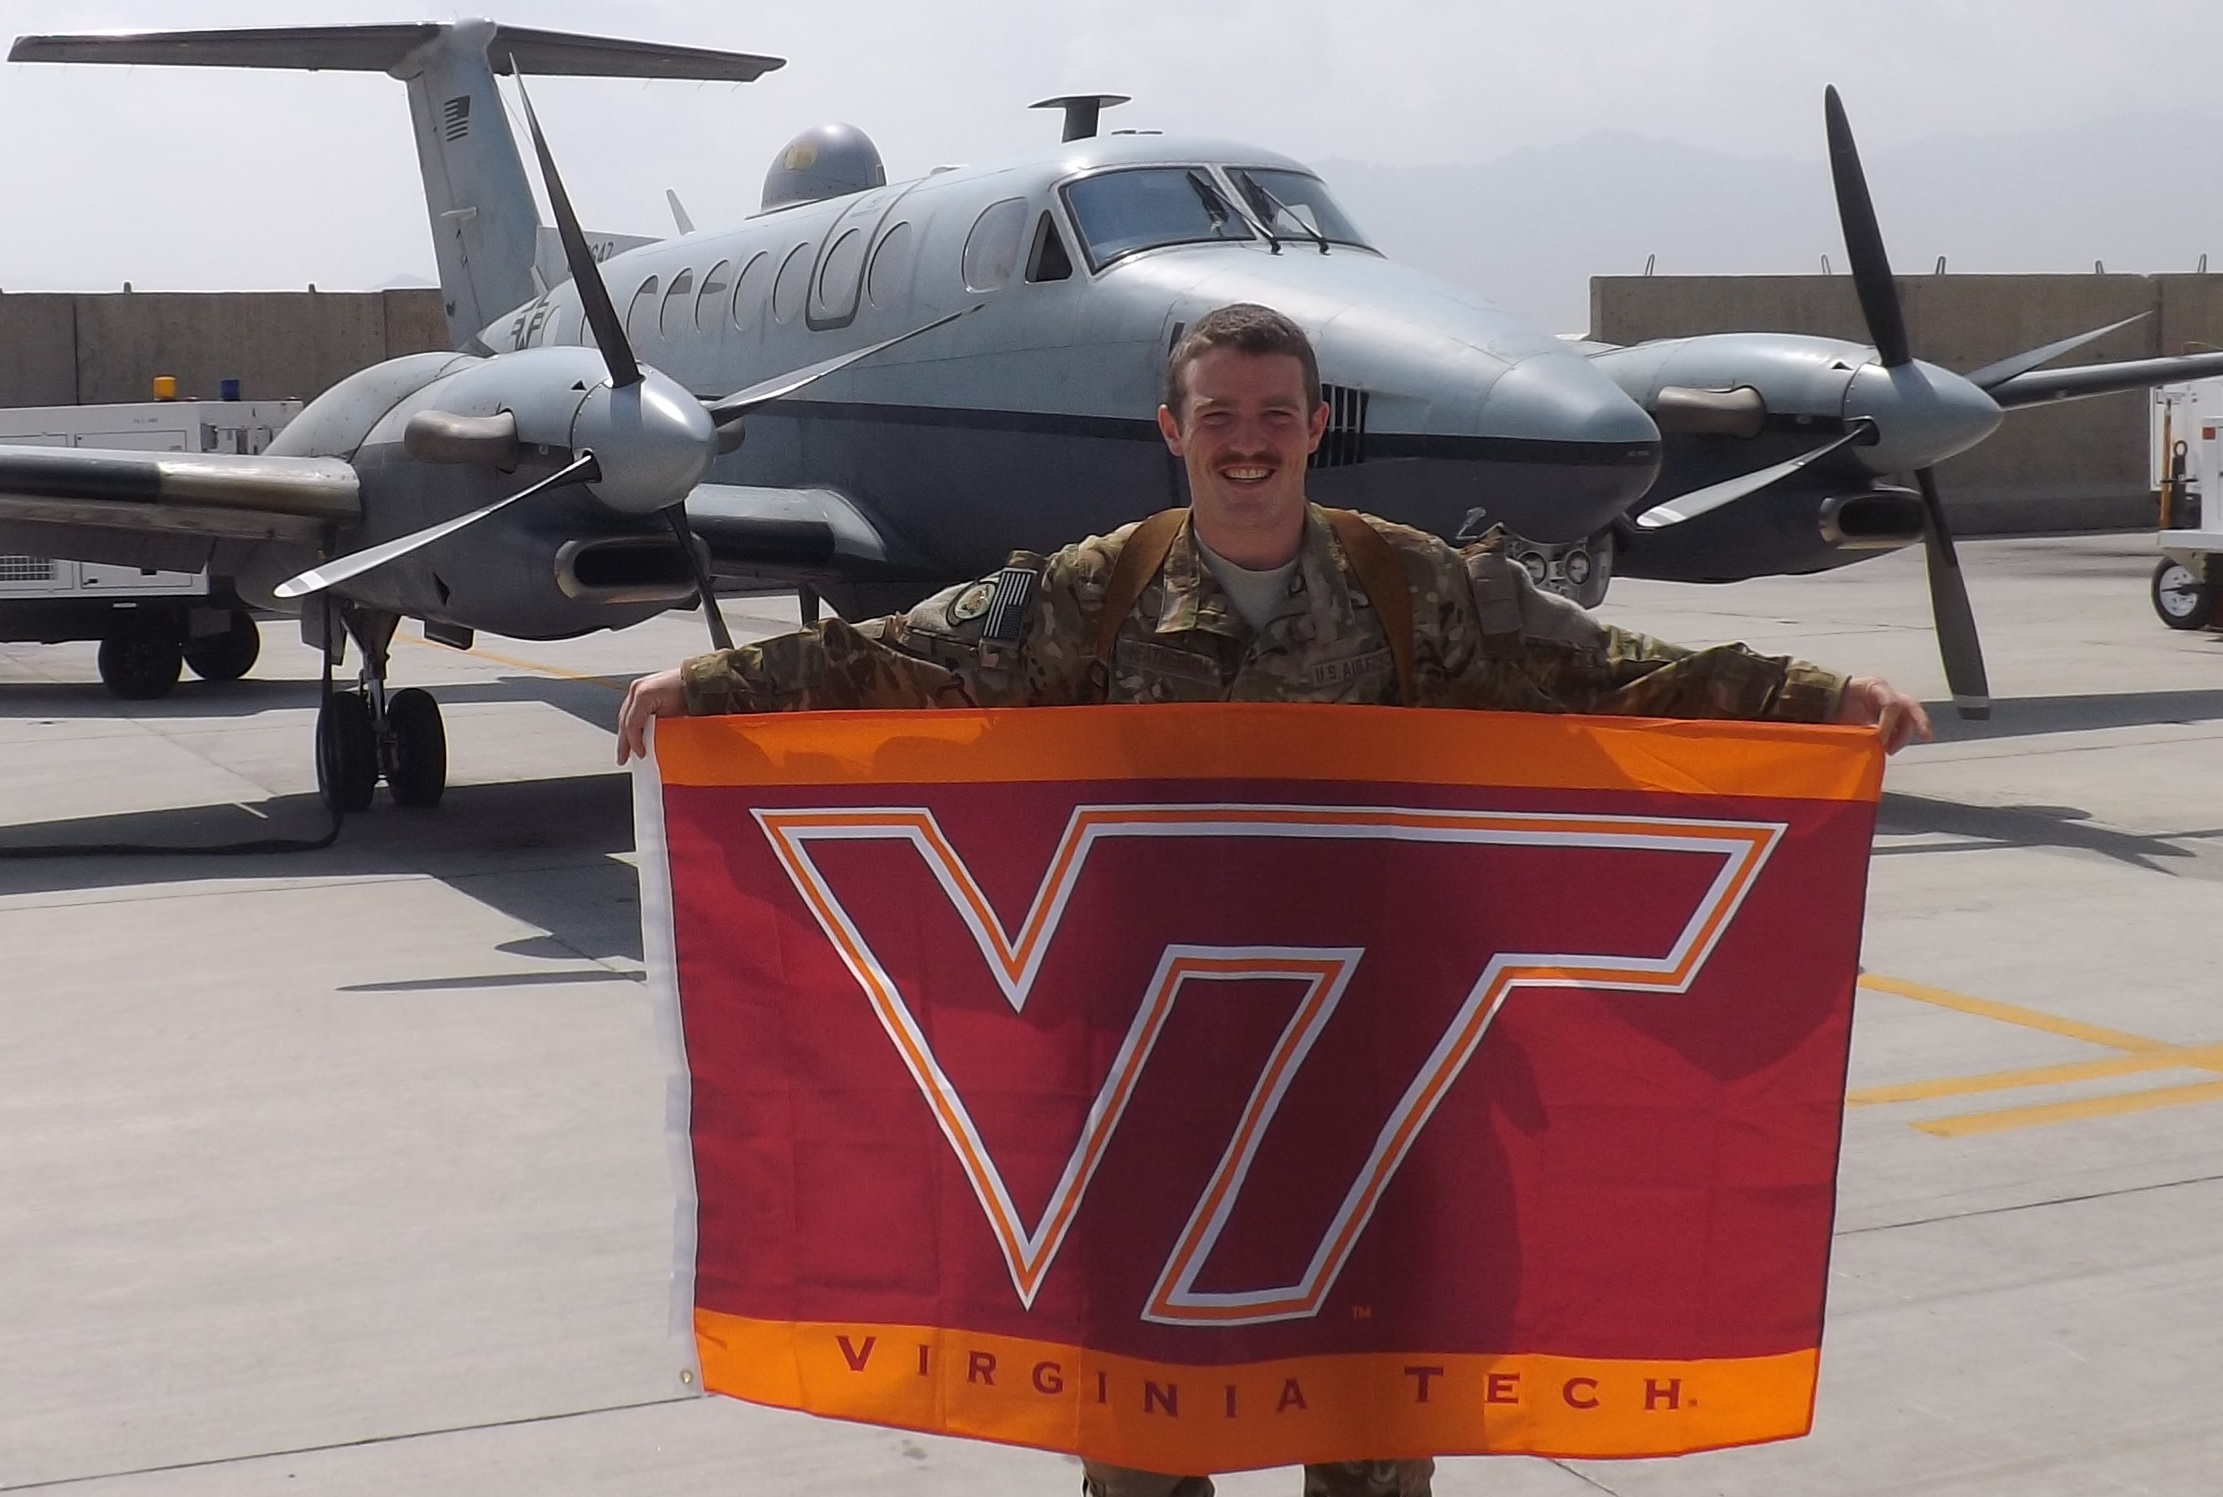 1st Lt. Sean Heatherman, U.S. Air Force, Virginia Tech Corps of Cadets Class of 2010 in Afghanistan